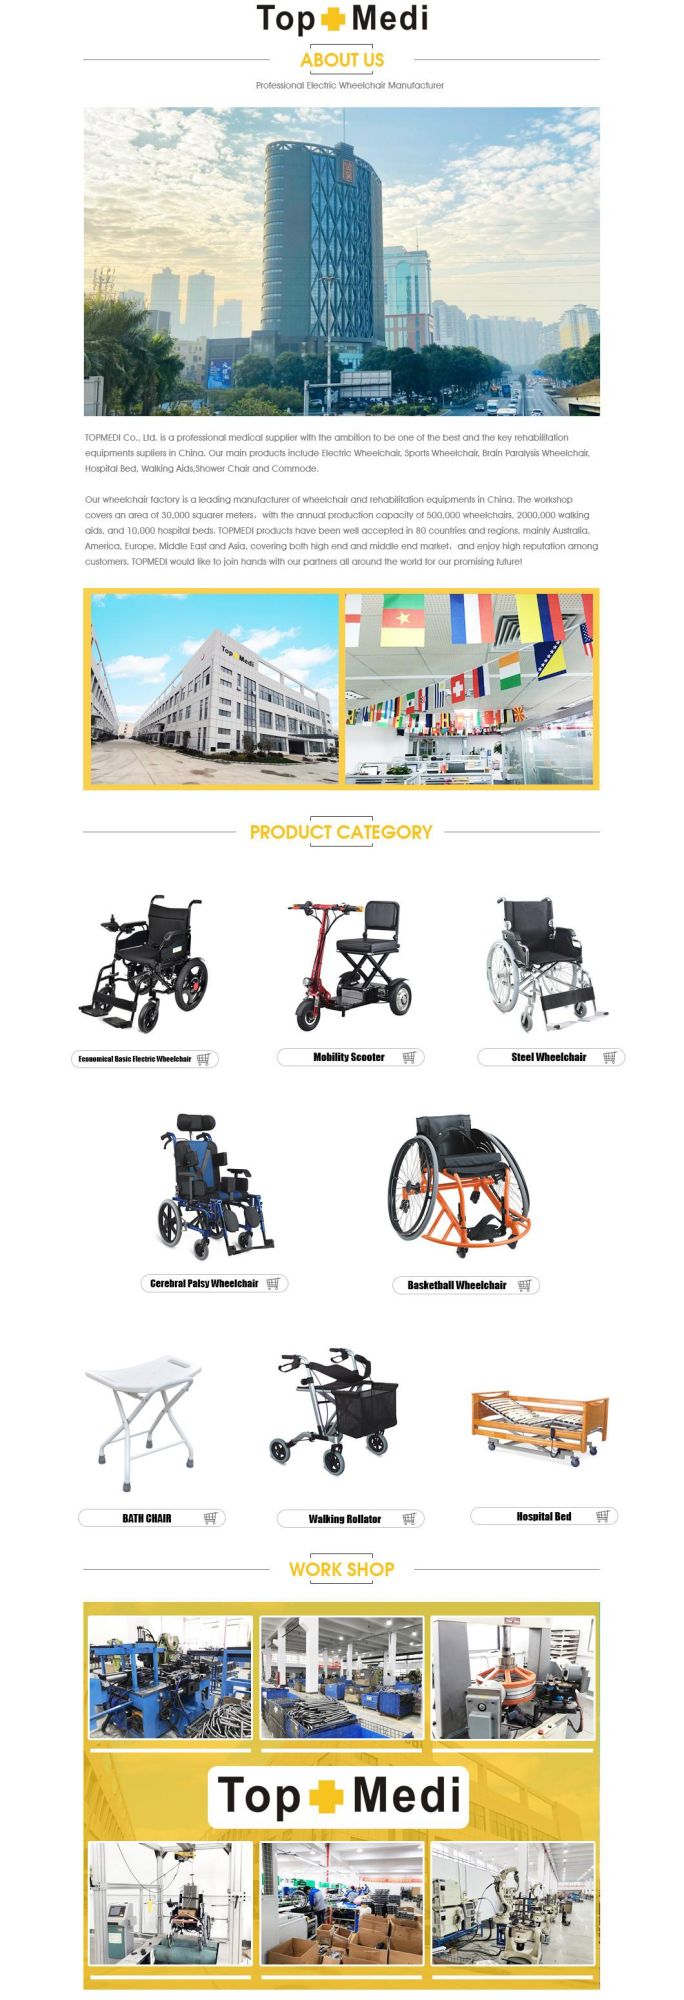 Topmedi High Quality Aluminum Manual Wheelchair with Reclined High Back